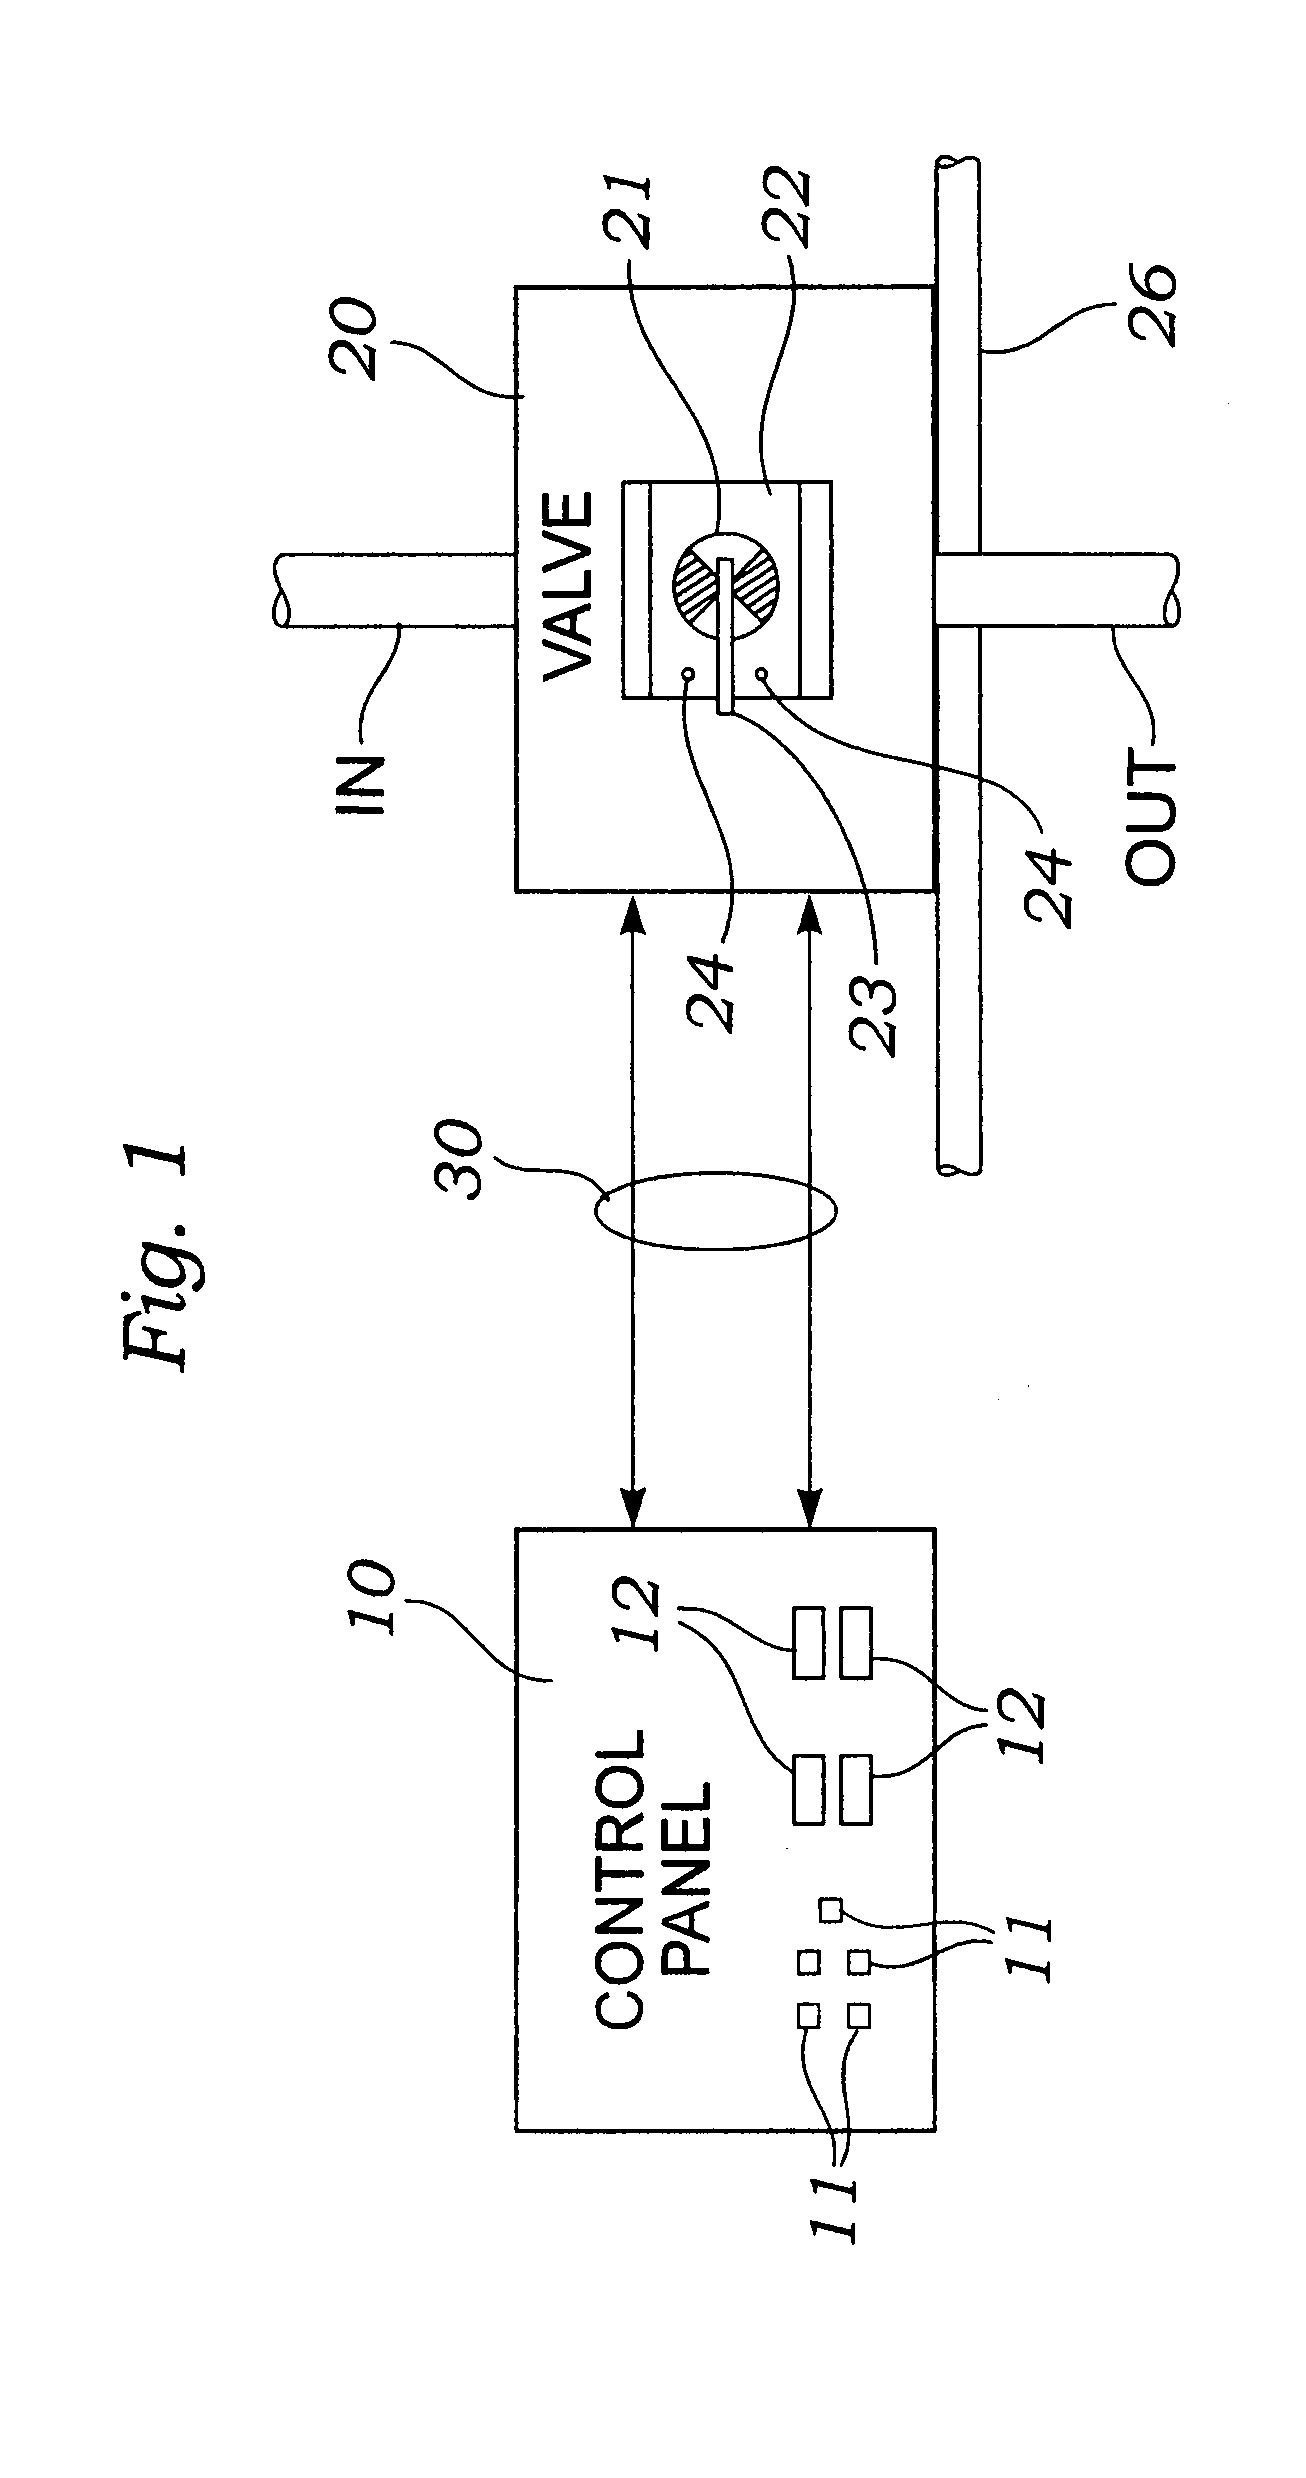 Valve monitoring and controlling system